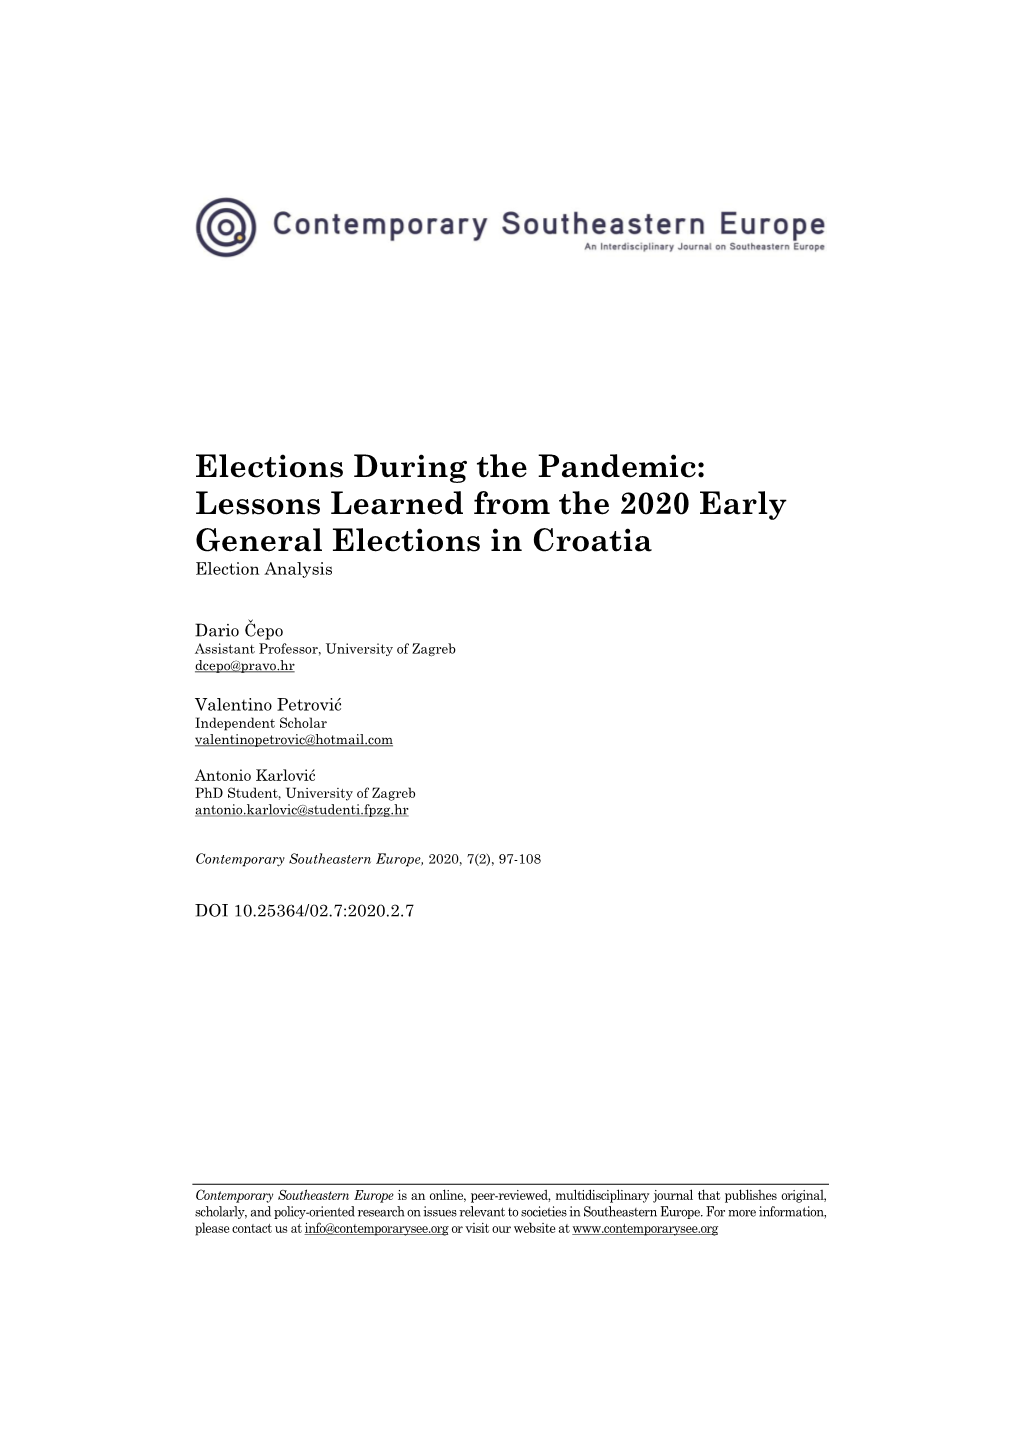 Lessons Learned from the 2020 Early General Elections in Croatia Election Analysis